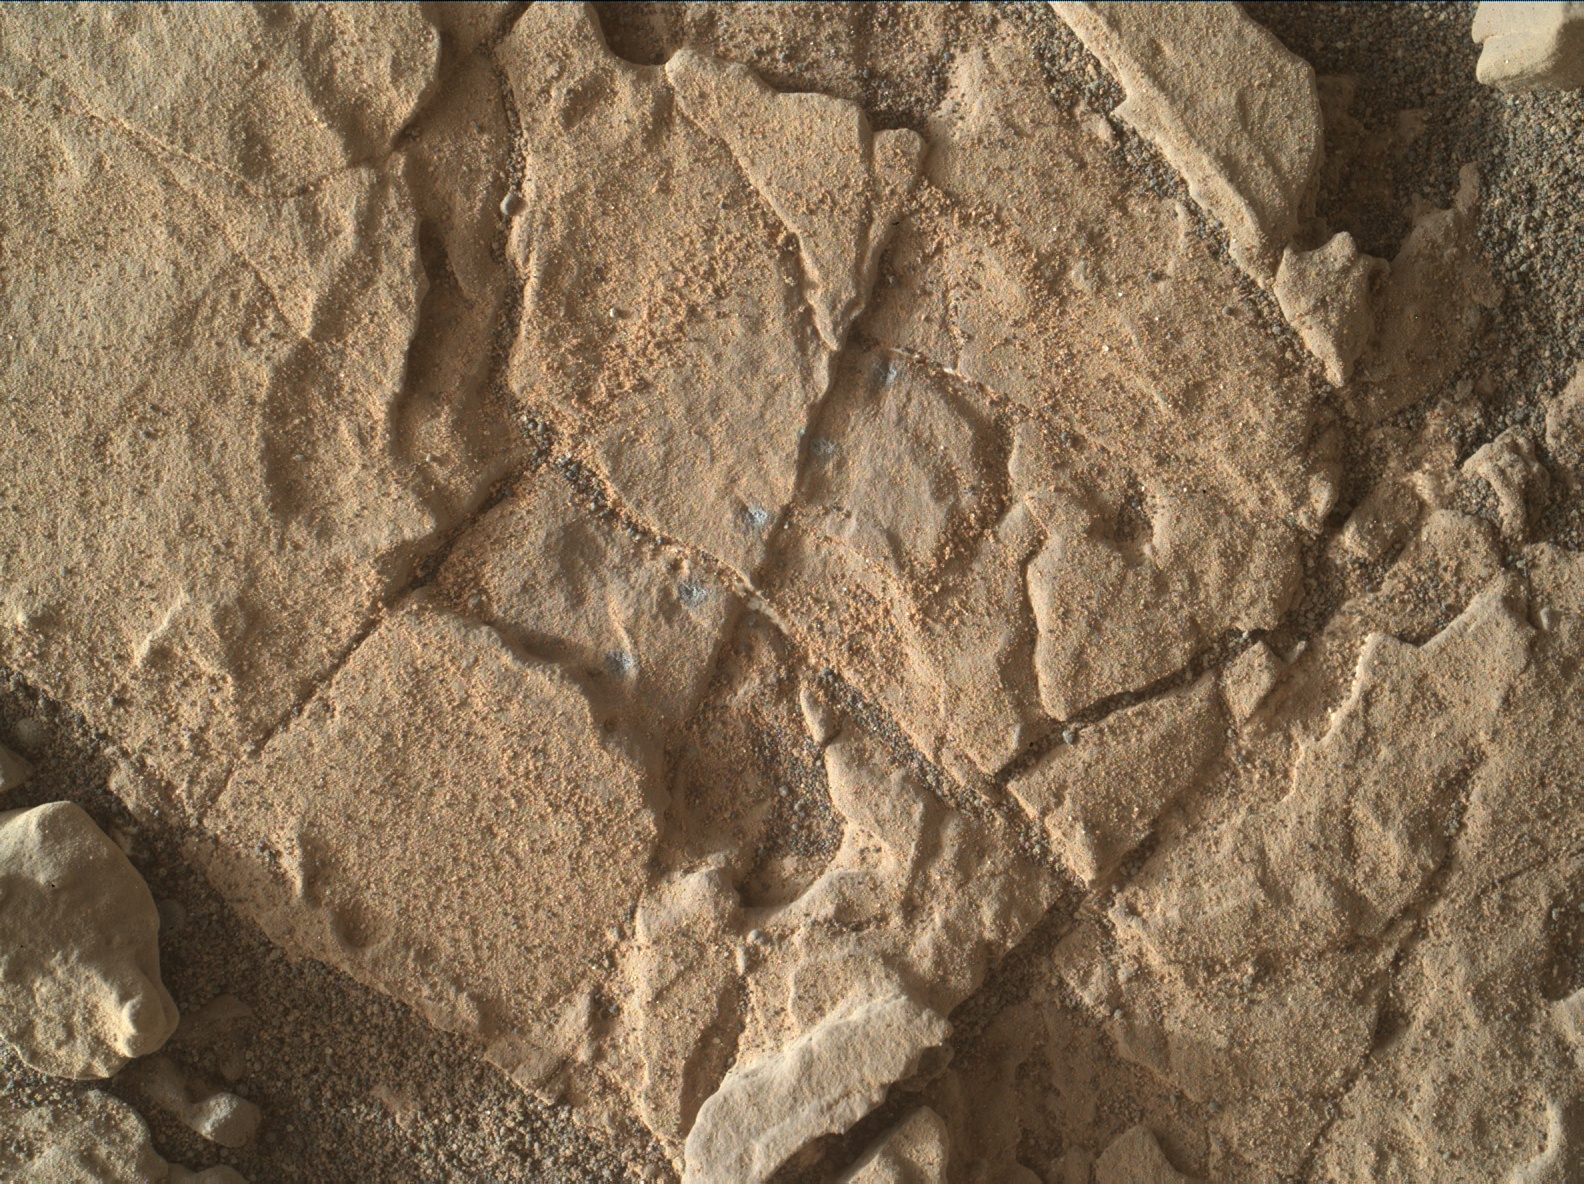 Nasa's Mars rover Curiosity acquired this image using its Mars Hand Lens Imager (MAHLI) on Sol 1940